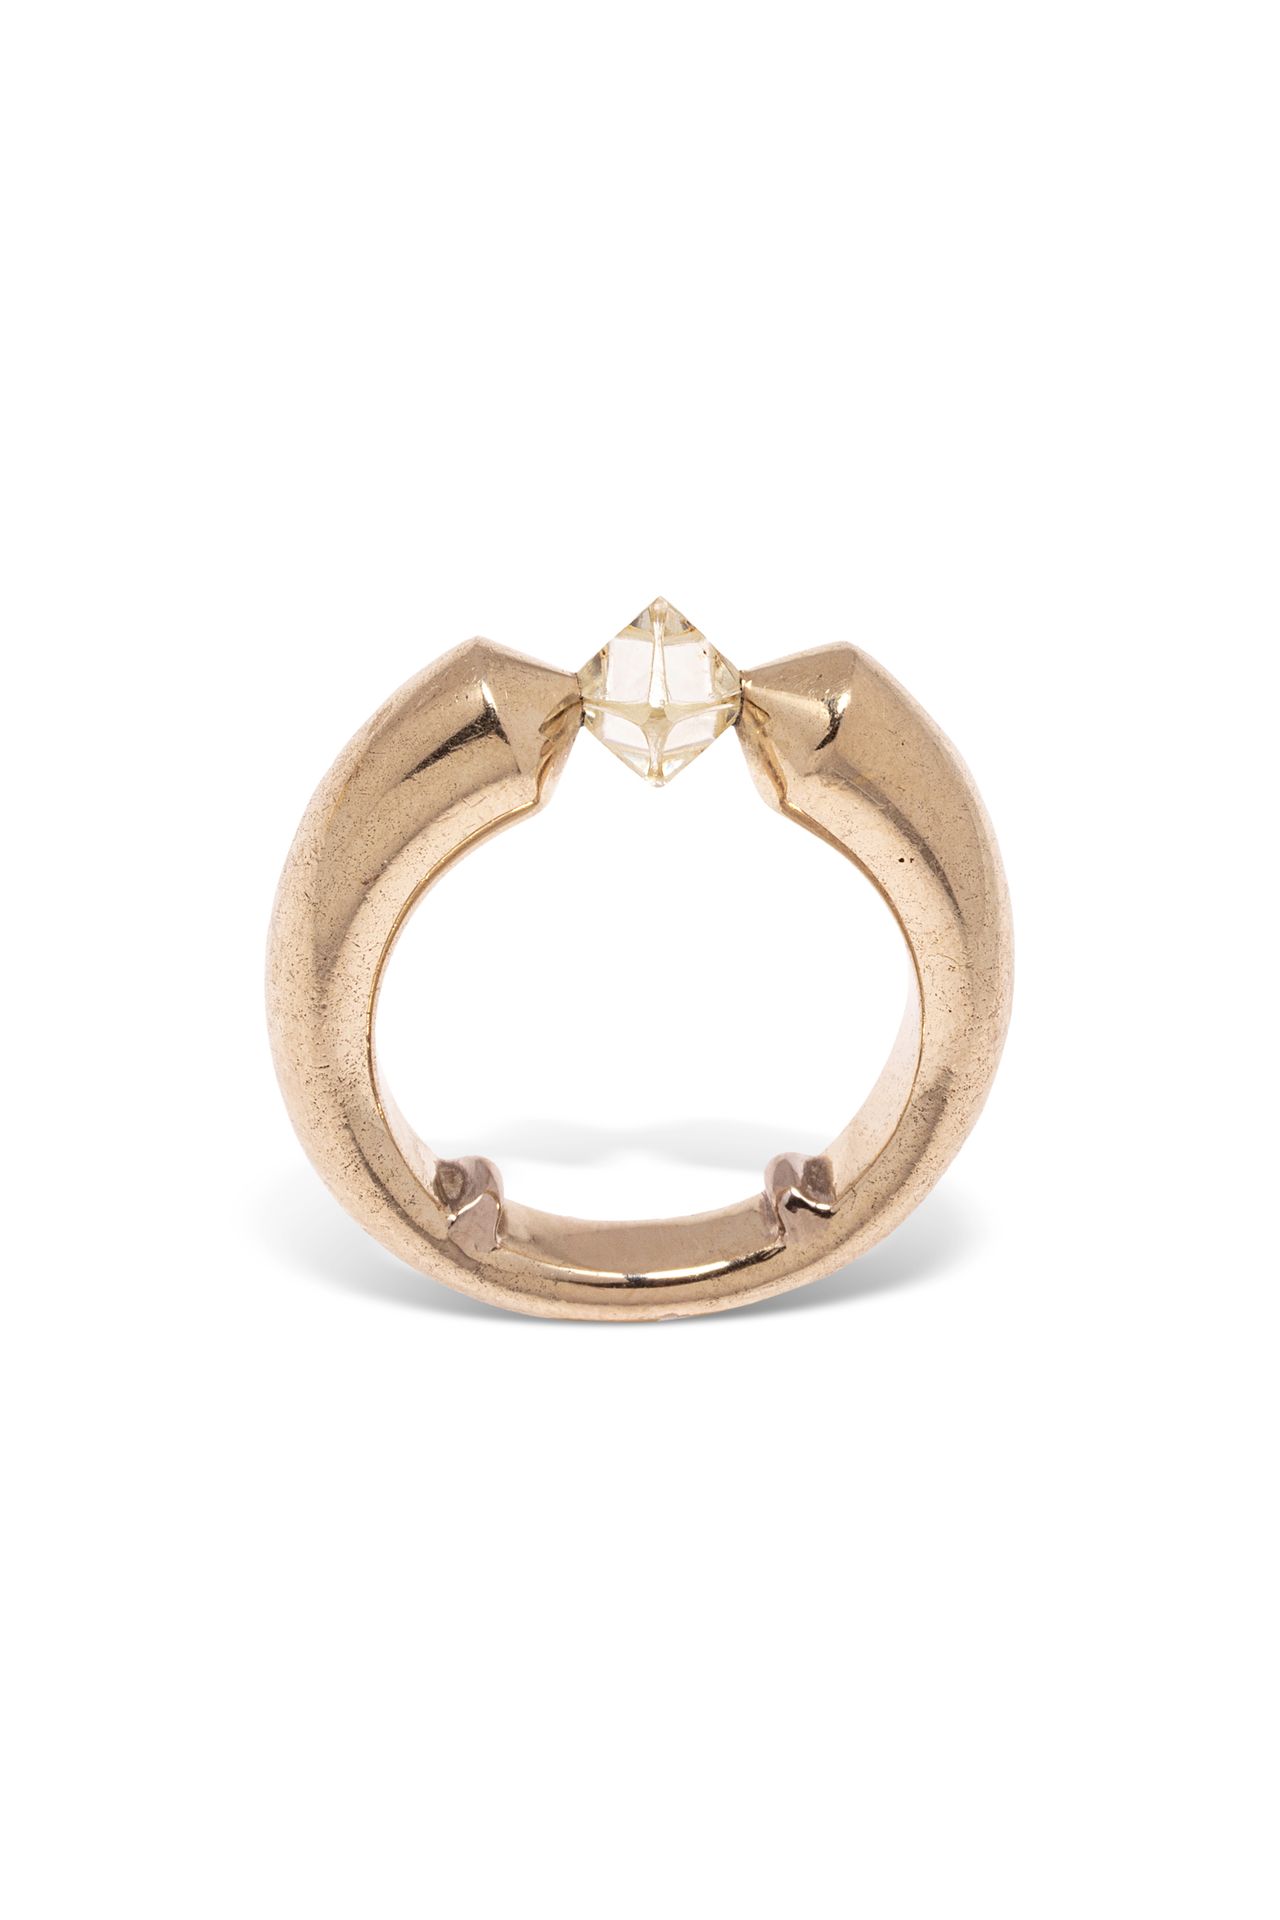 Null 18K (750) yellow gold ring set with a rough octahedral diamond.

Partial ma&hellip;